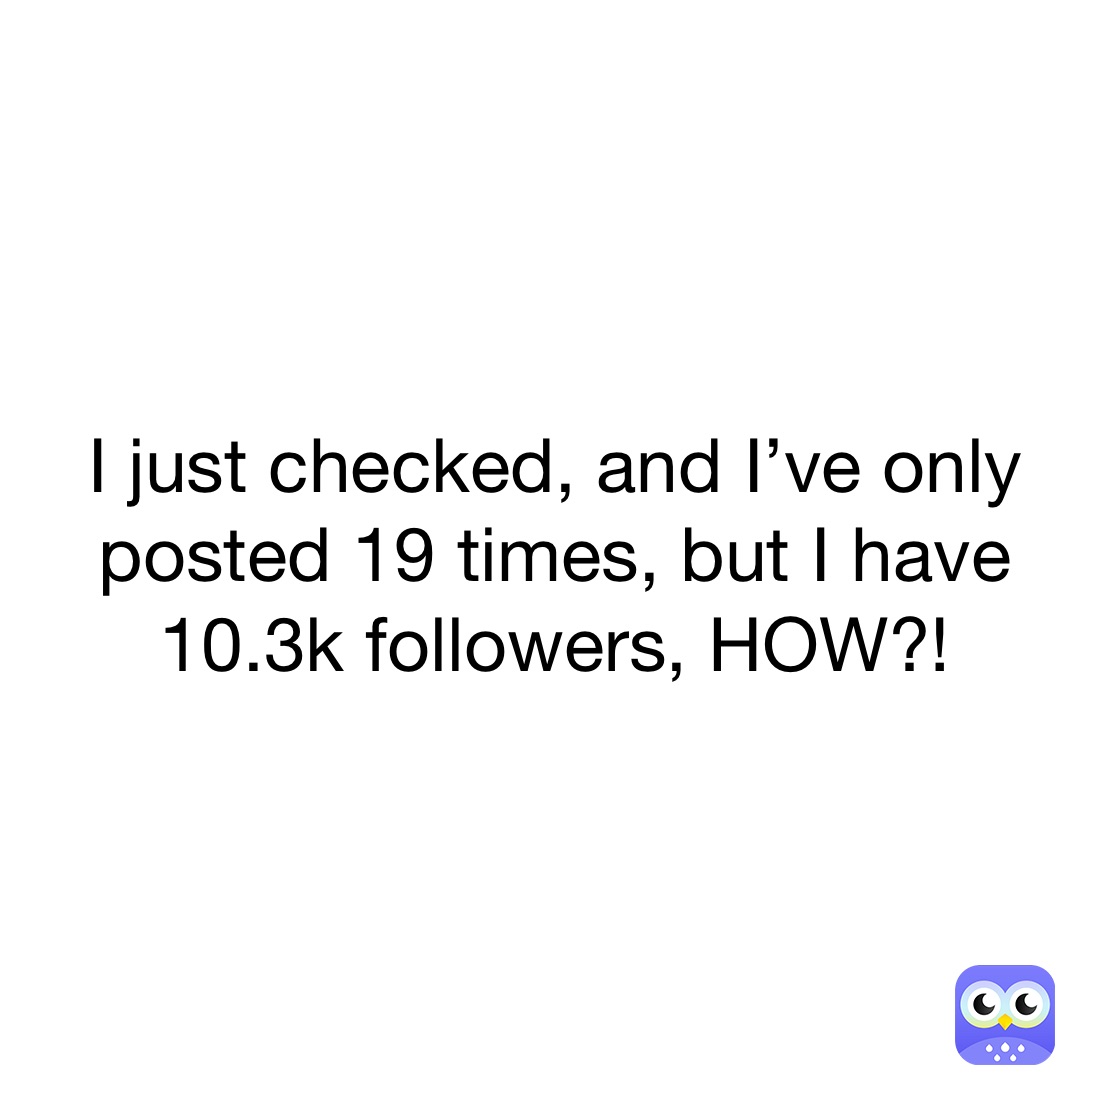 I just checked, and I’ve only posted 19 times, but I have 10.3k followers, HOW?!